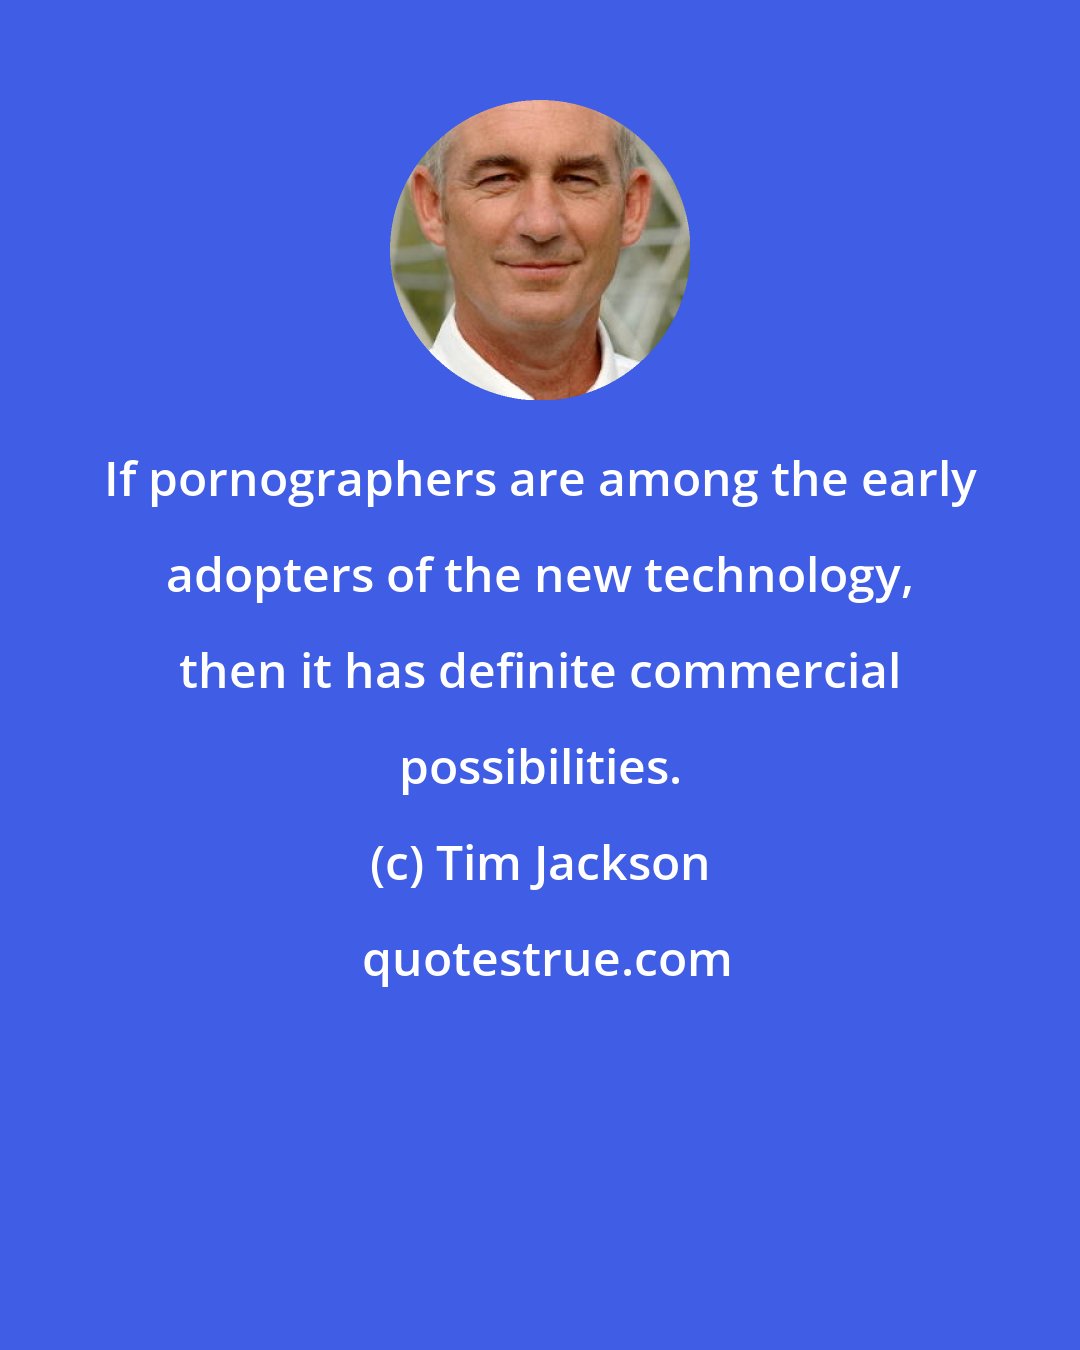 Tim Jackson: If pornographers are among the early adopters of the new technology, then it has definite commercial possibilities.